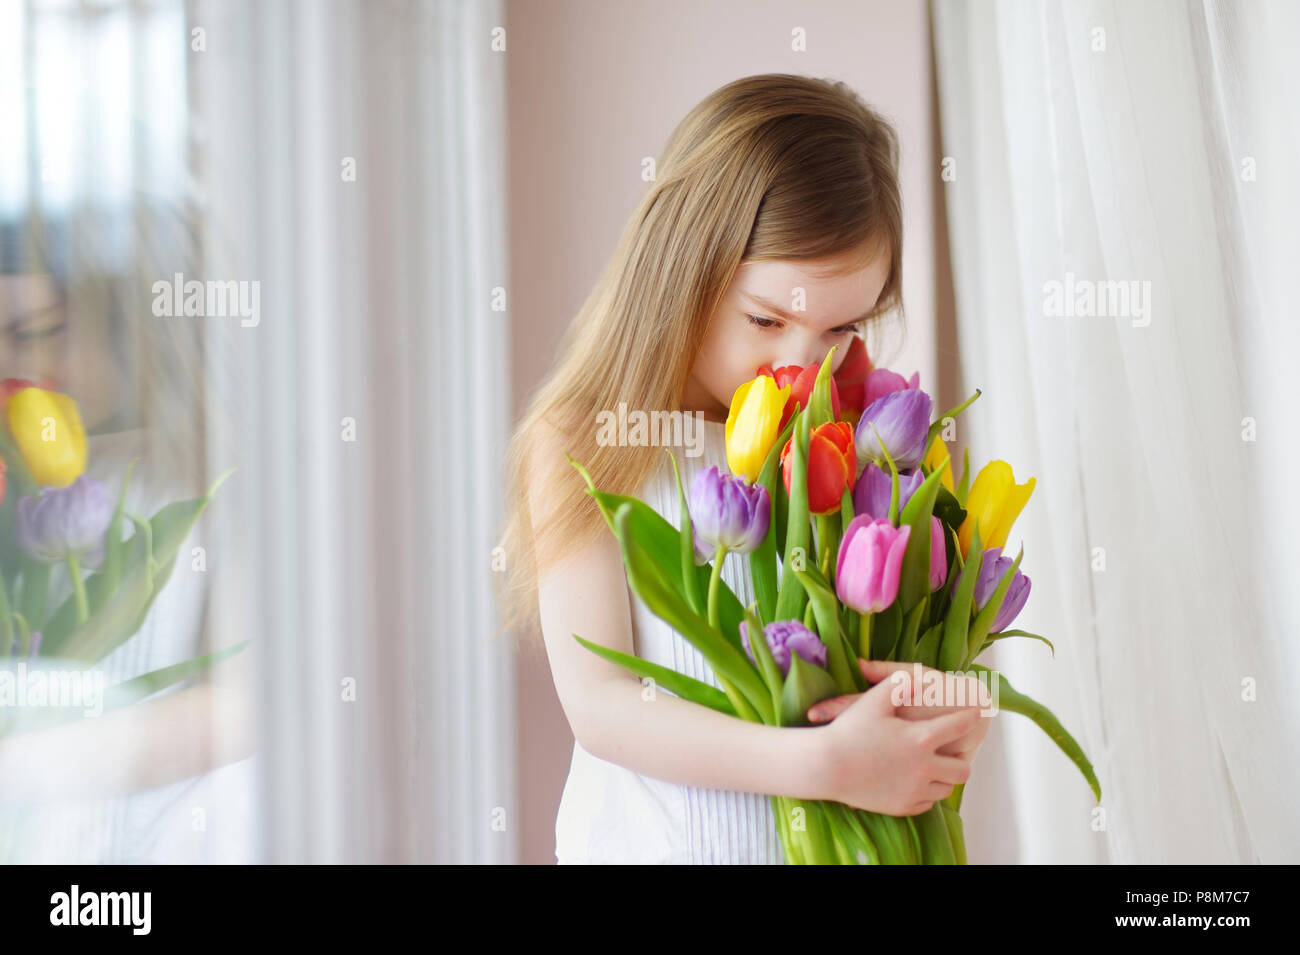 Adorable smiling little girl holding tulips by the window Stock Photo